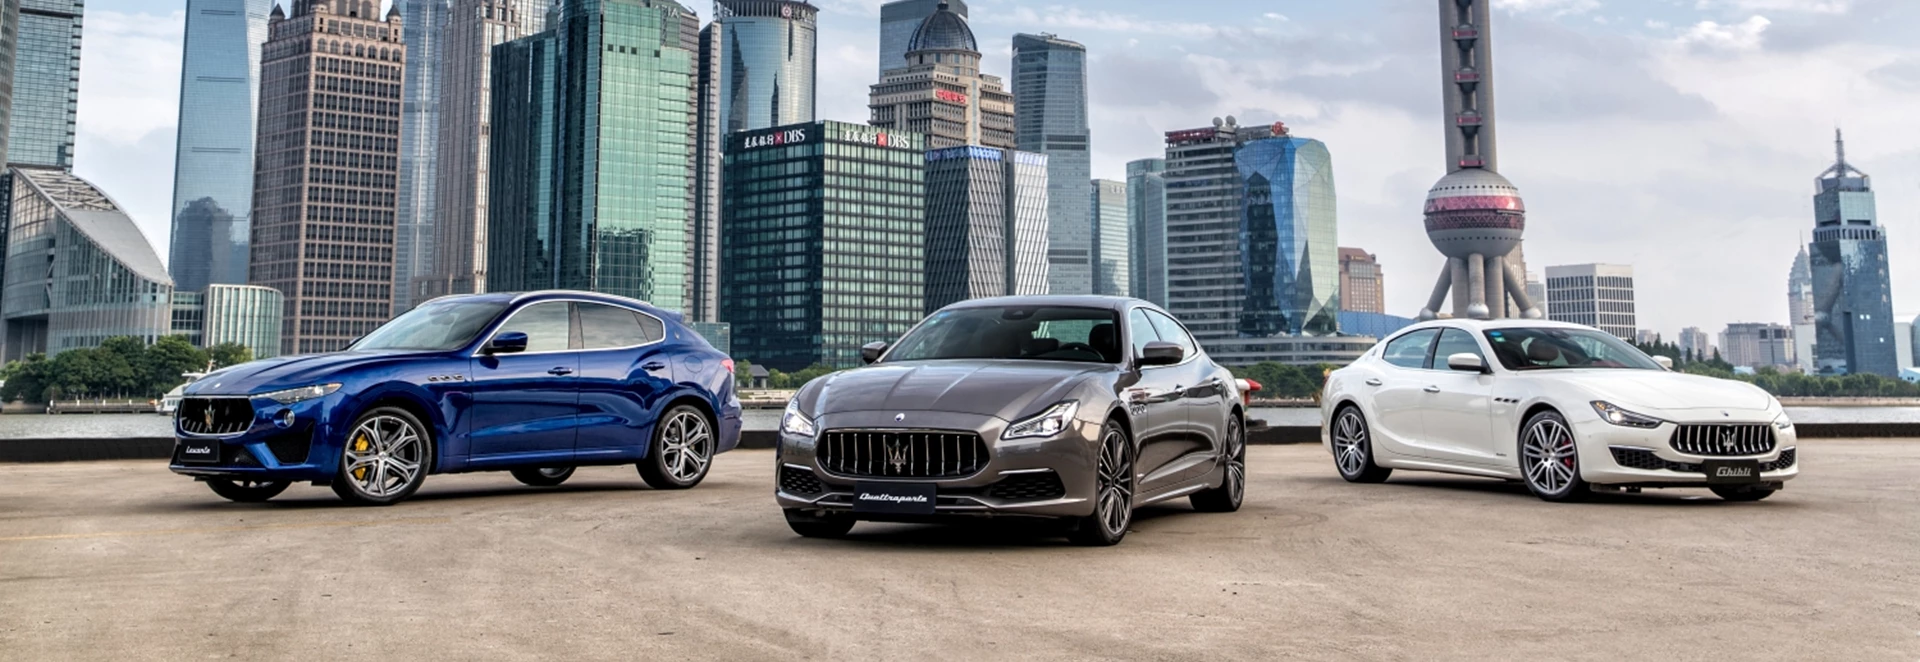 What can you expect from Maserati in the coming years?